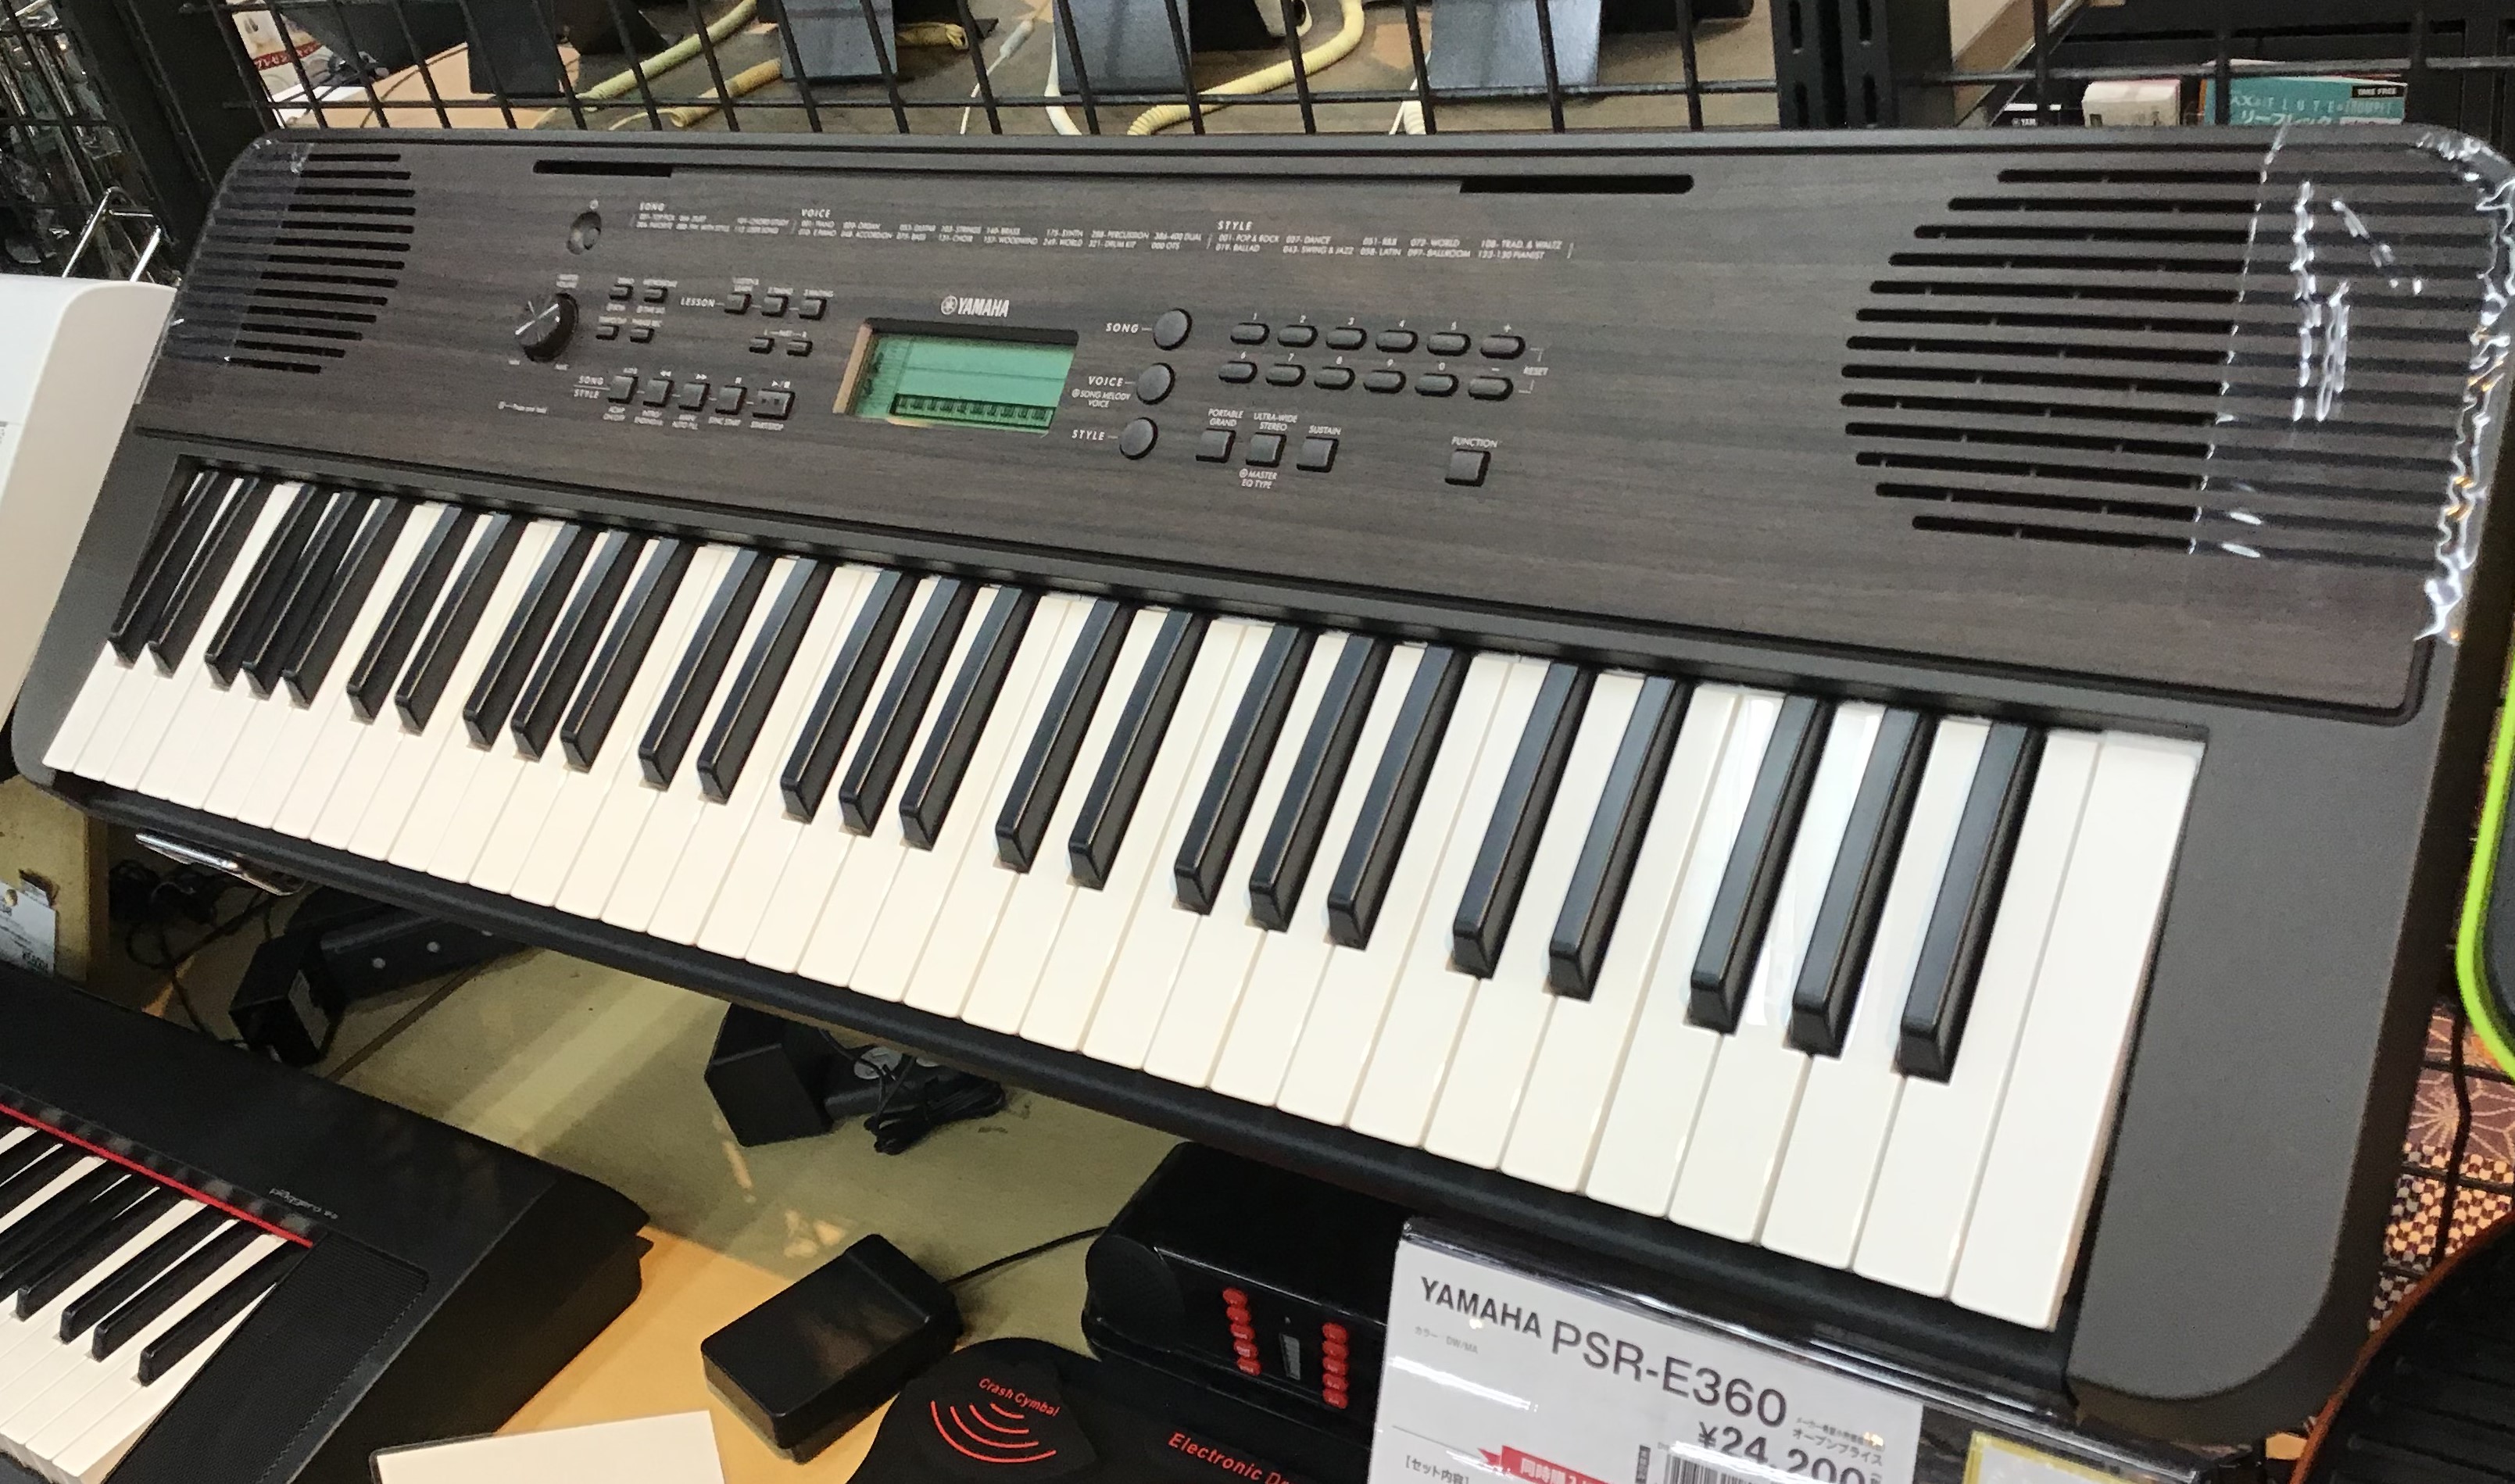 *[https://jp.yamaha.com/products/musical_instruments/keyboards/portable_keyboards/psr-e360/index.html:title=PSR-E360DW]が入荷しました! [!!皆様、楽しい音楽ライフをお過ごしでしょ […]